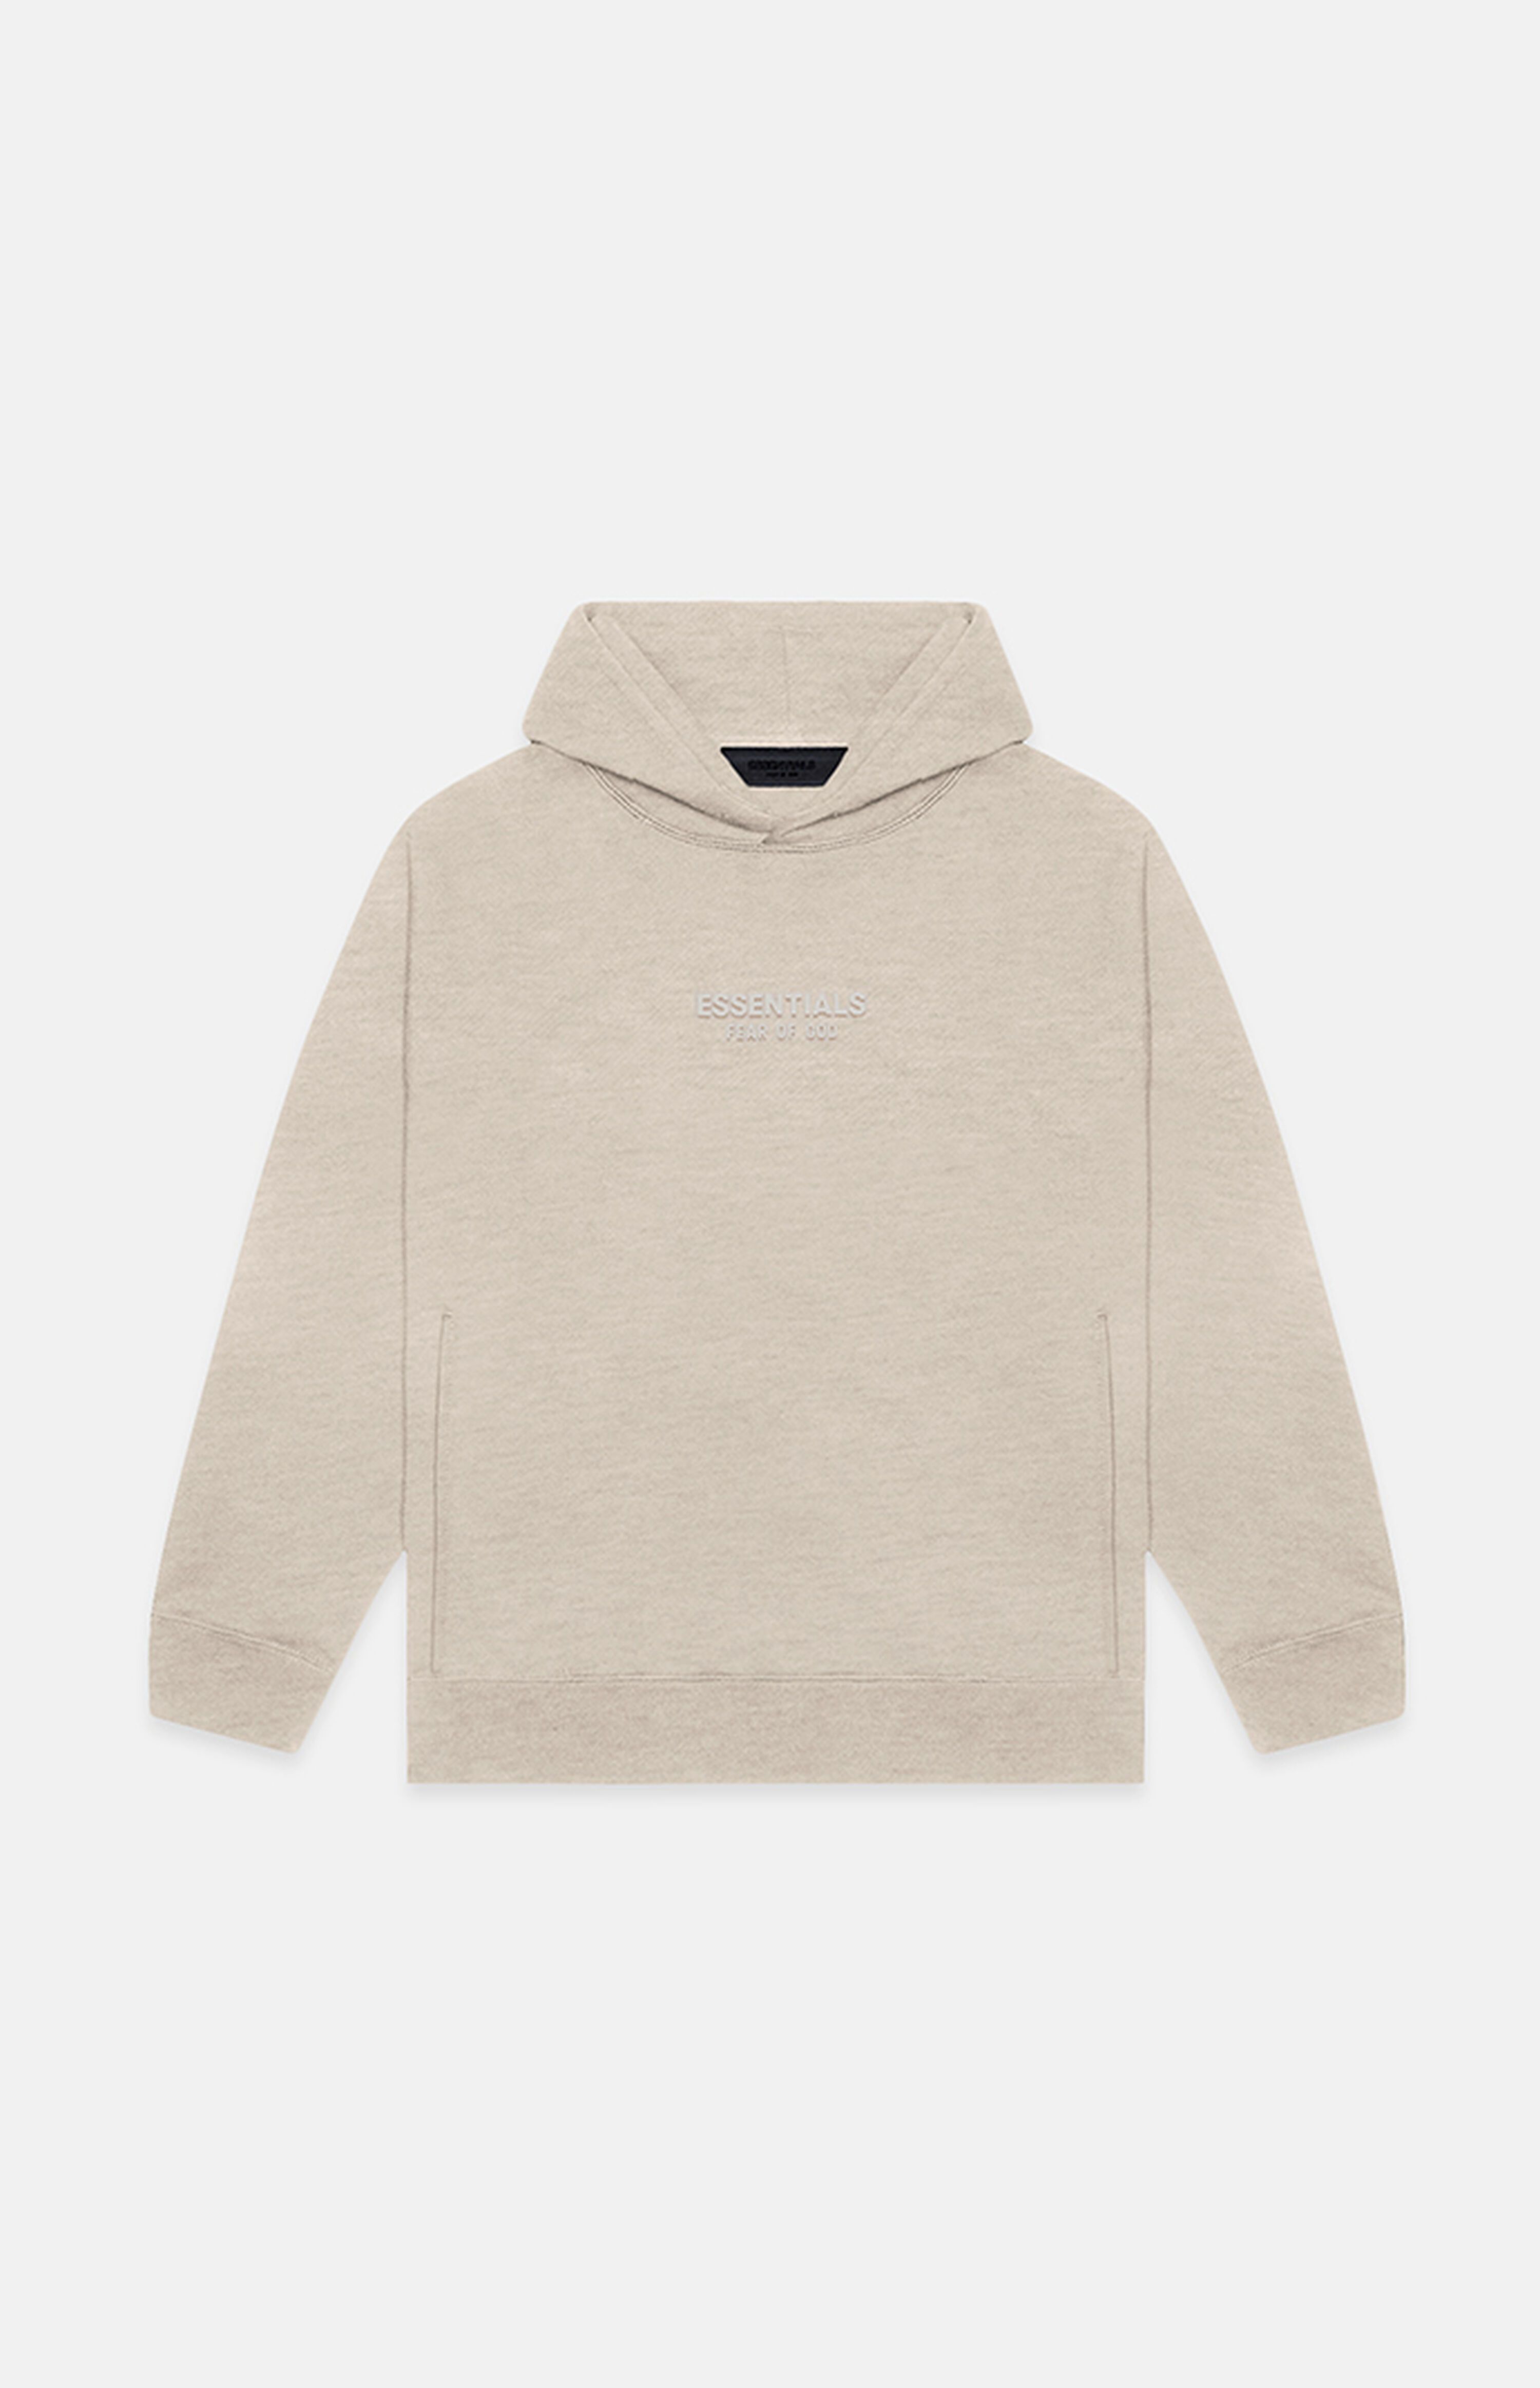 Fear of God Essentials Core Heather Hoodie | PacSun